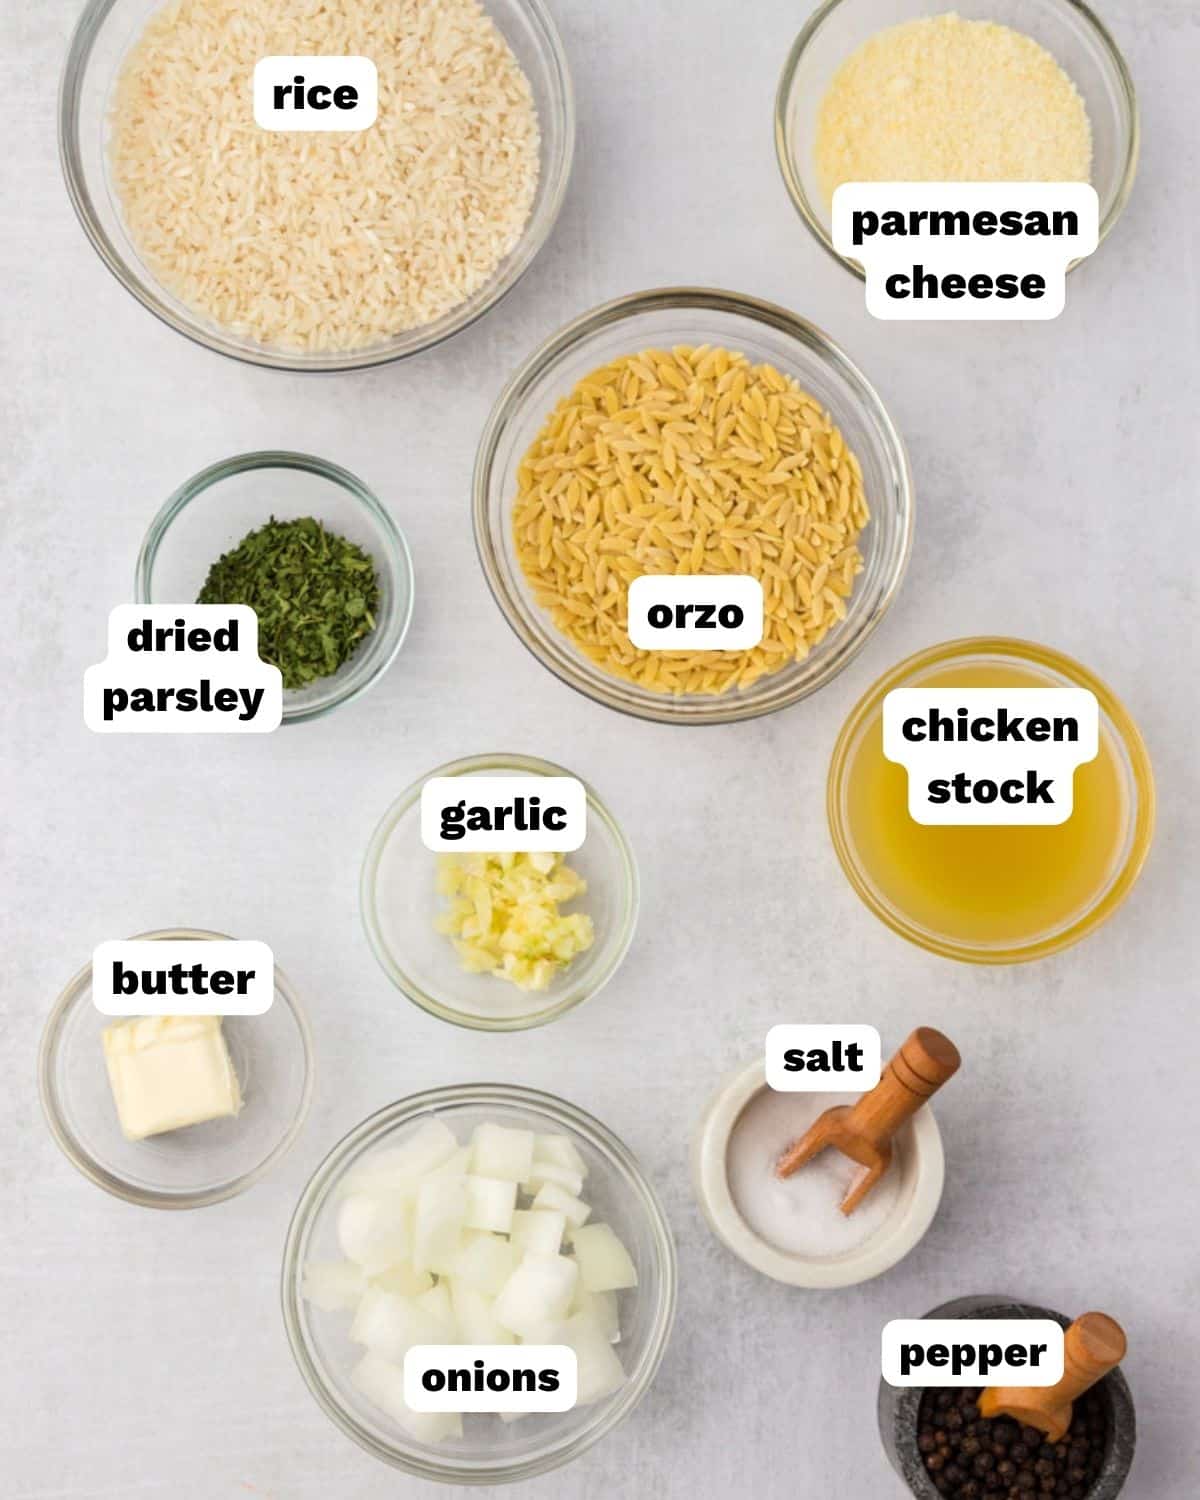 ingredients for orzo rice pilaf on a table